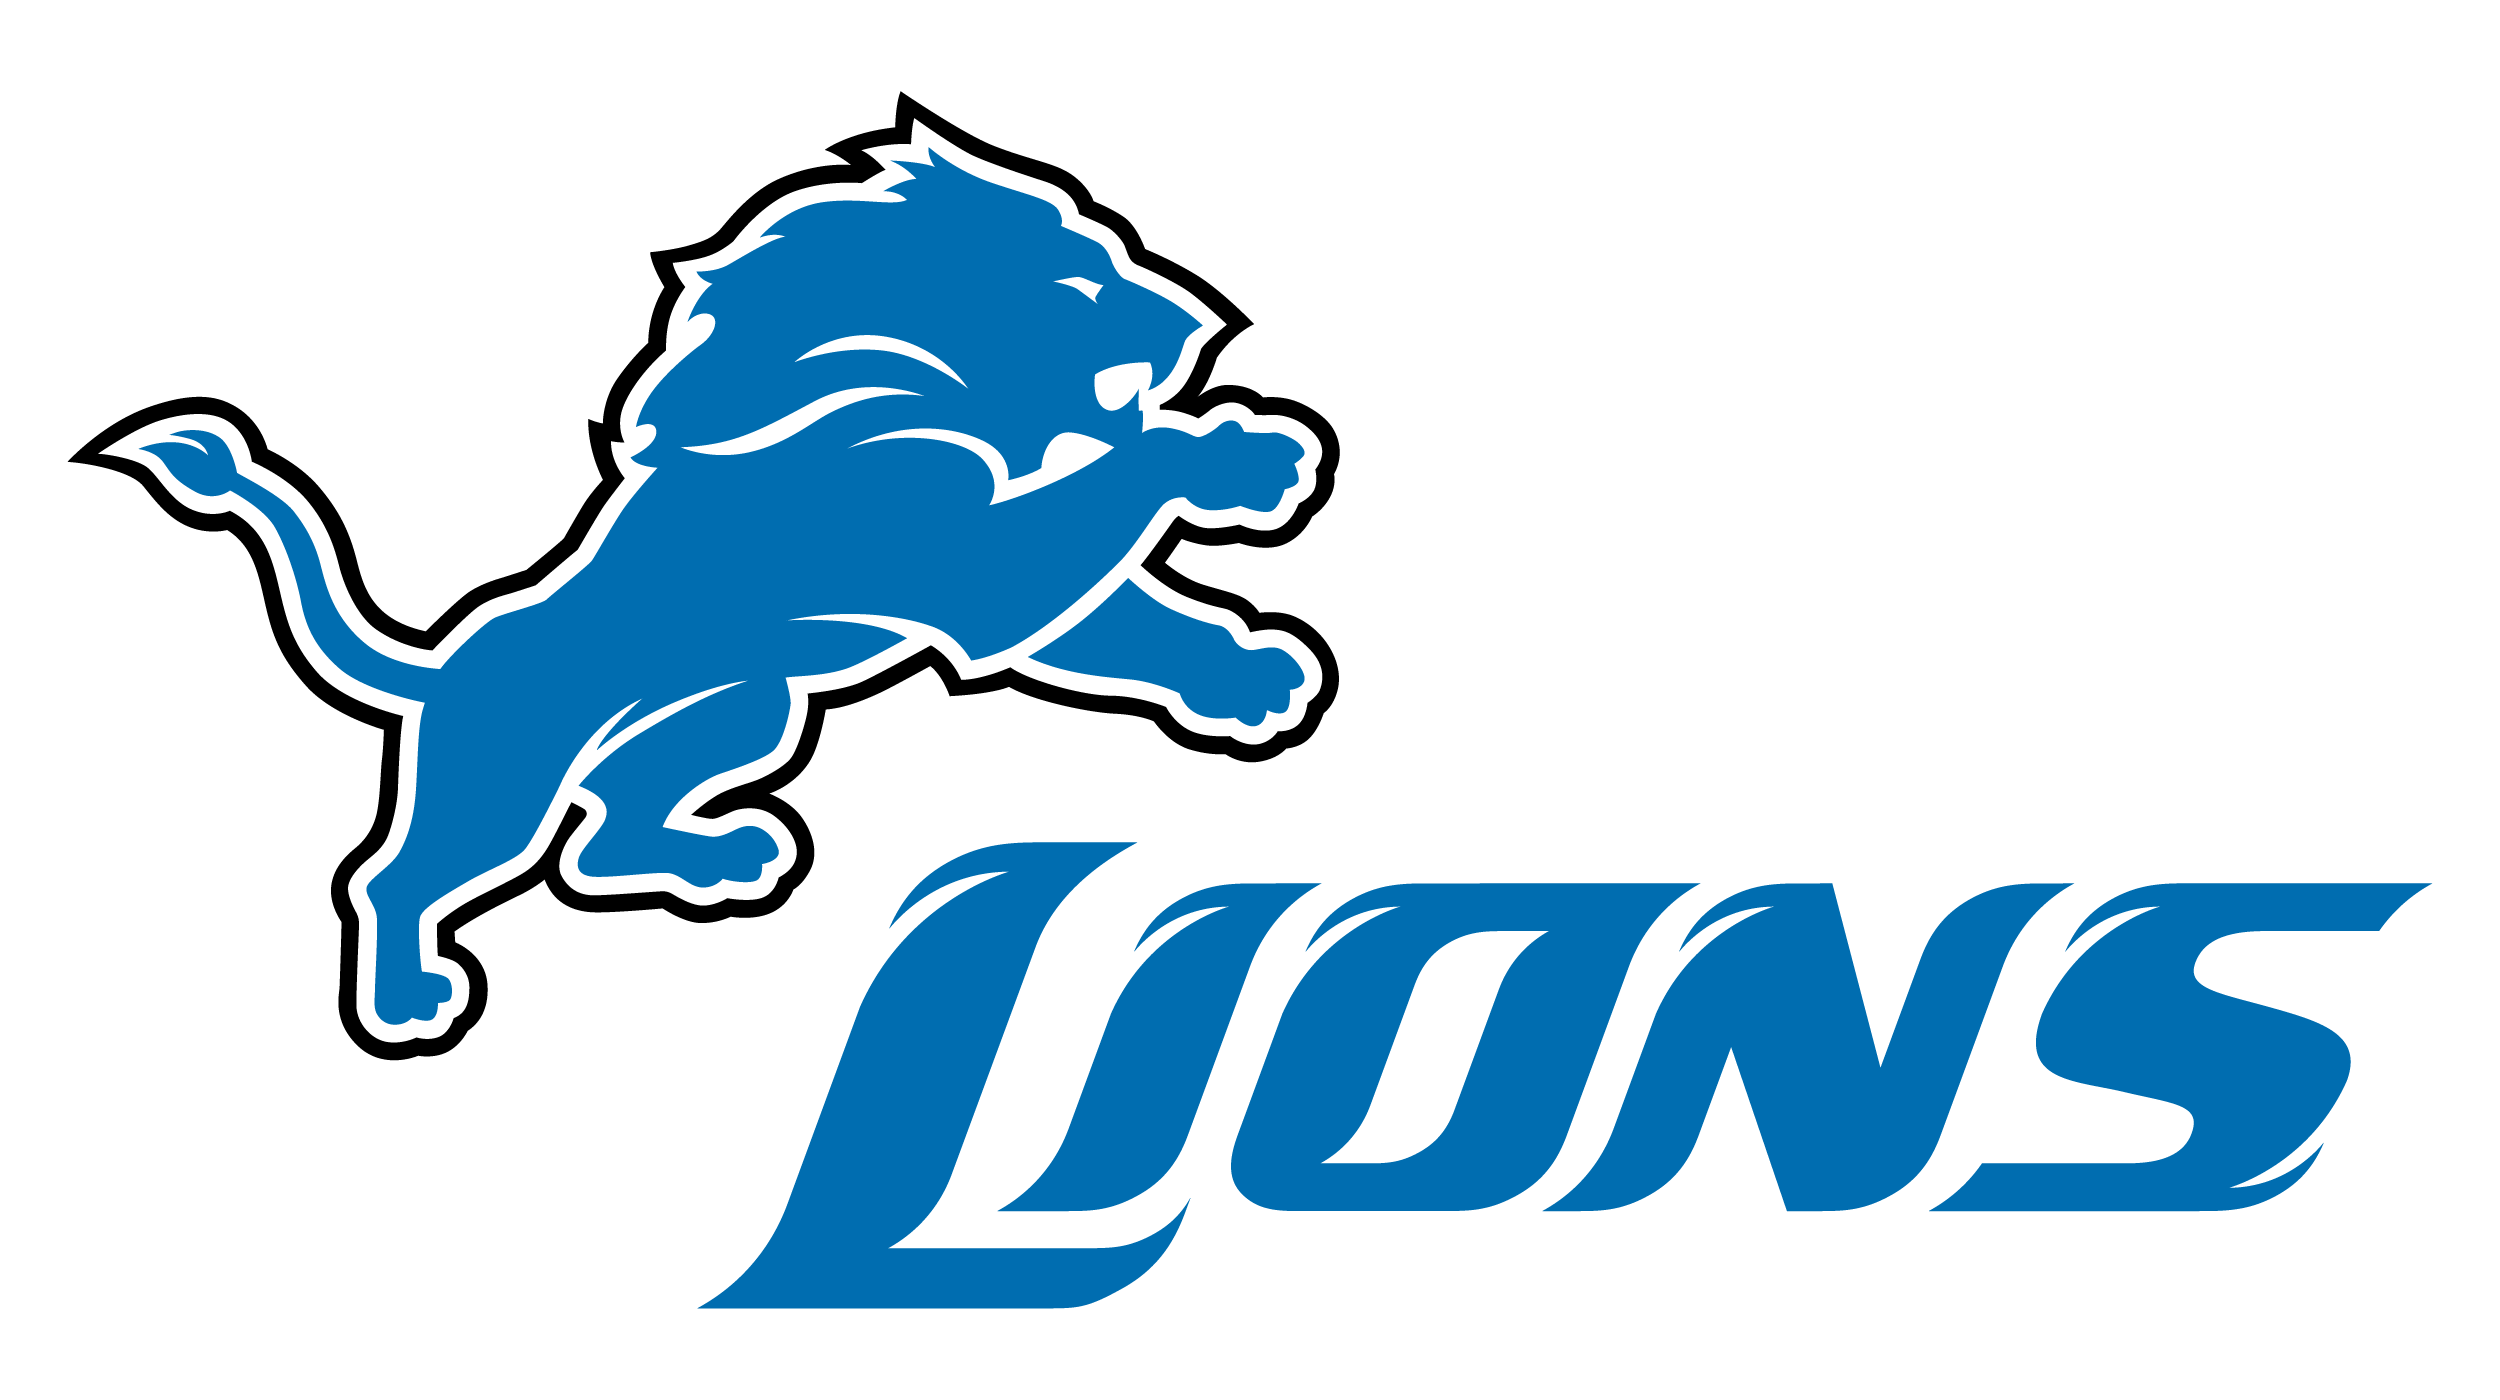 Detroit Lions Logo - Detroit Lions Logo, Detroit Lions Symbol, Meaning, History and Evolution